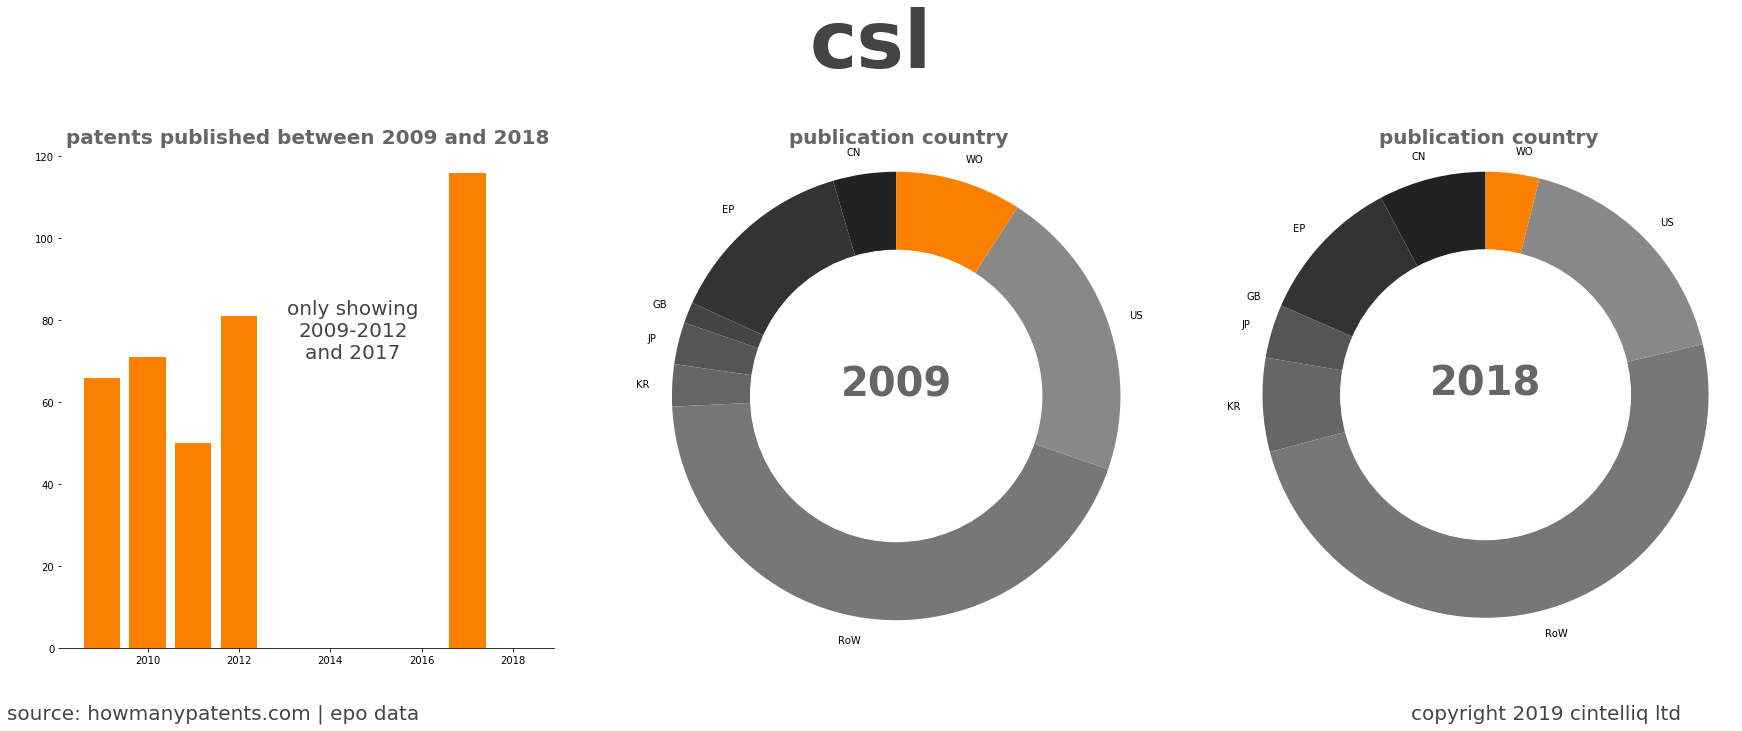 summary of patents for Csl